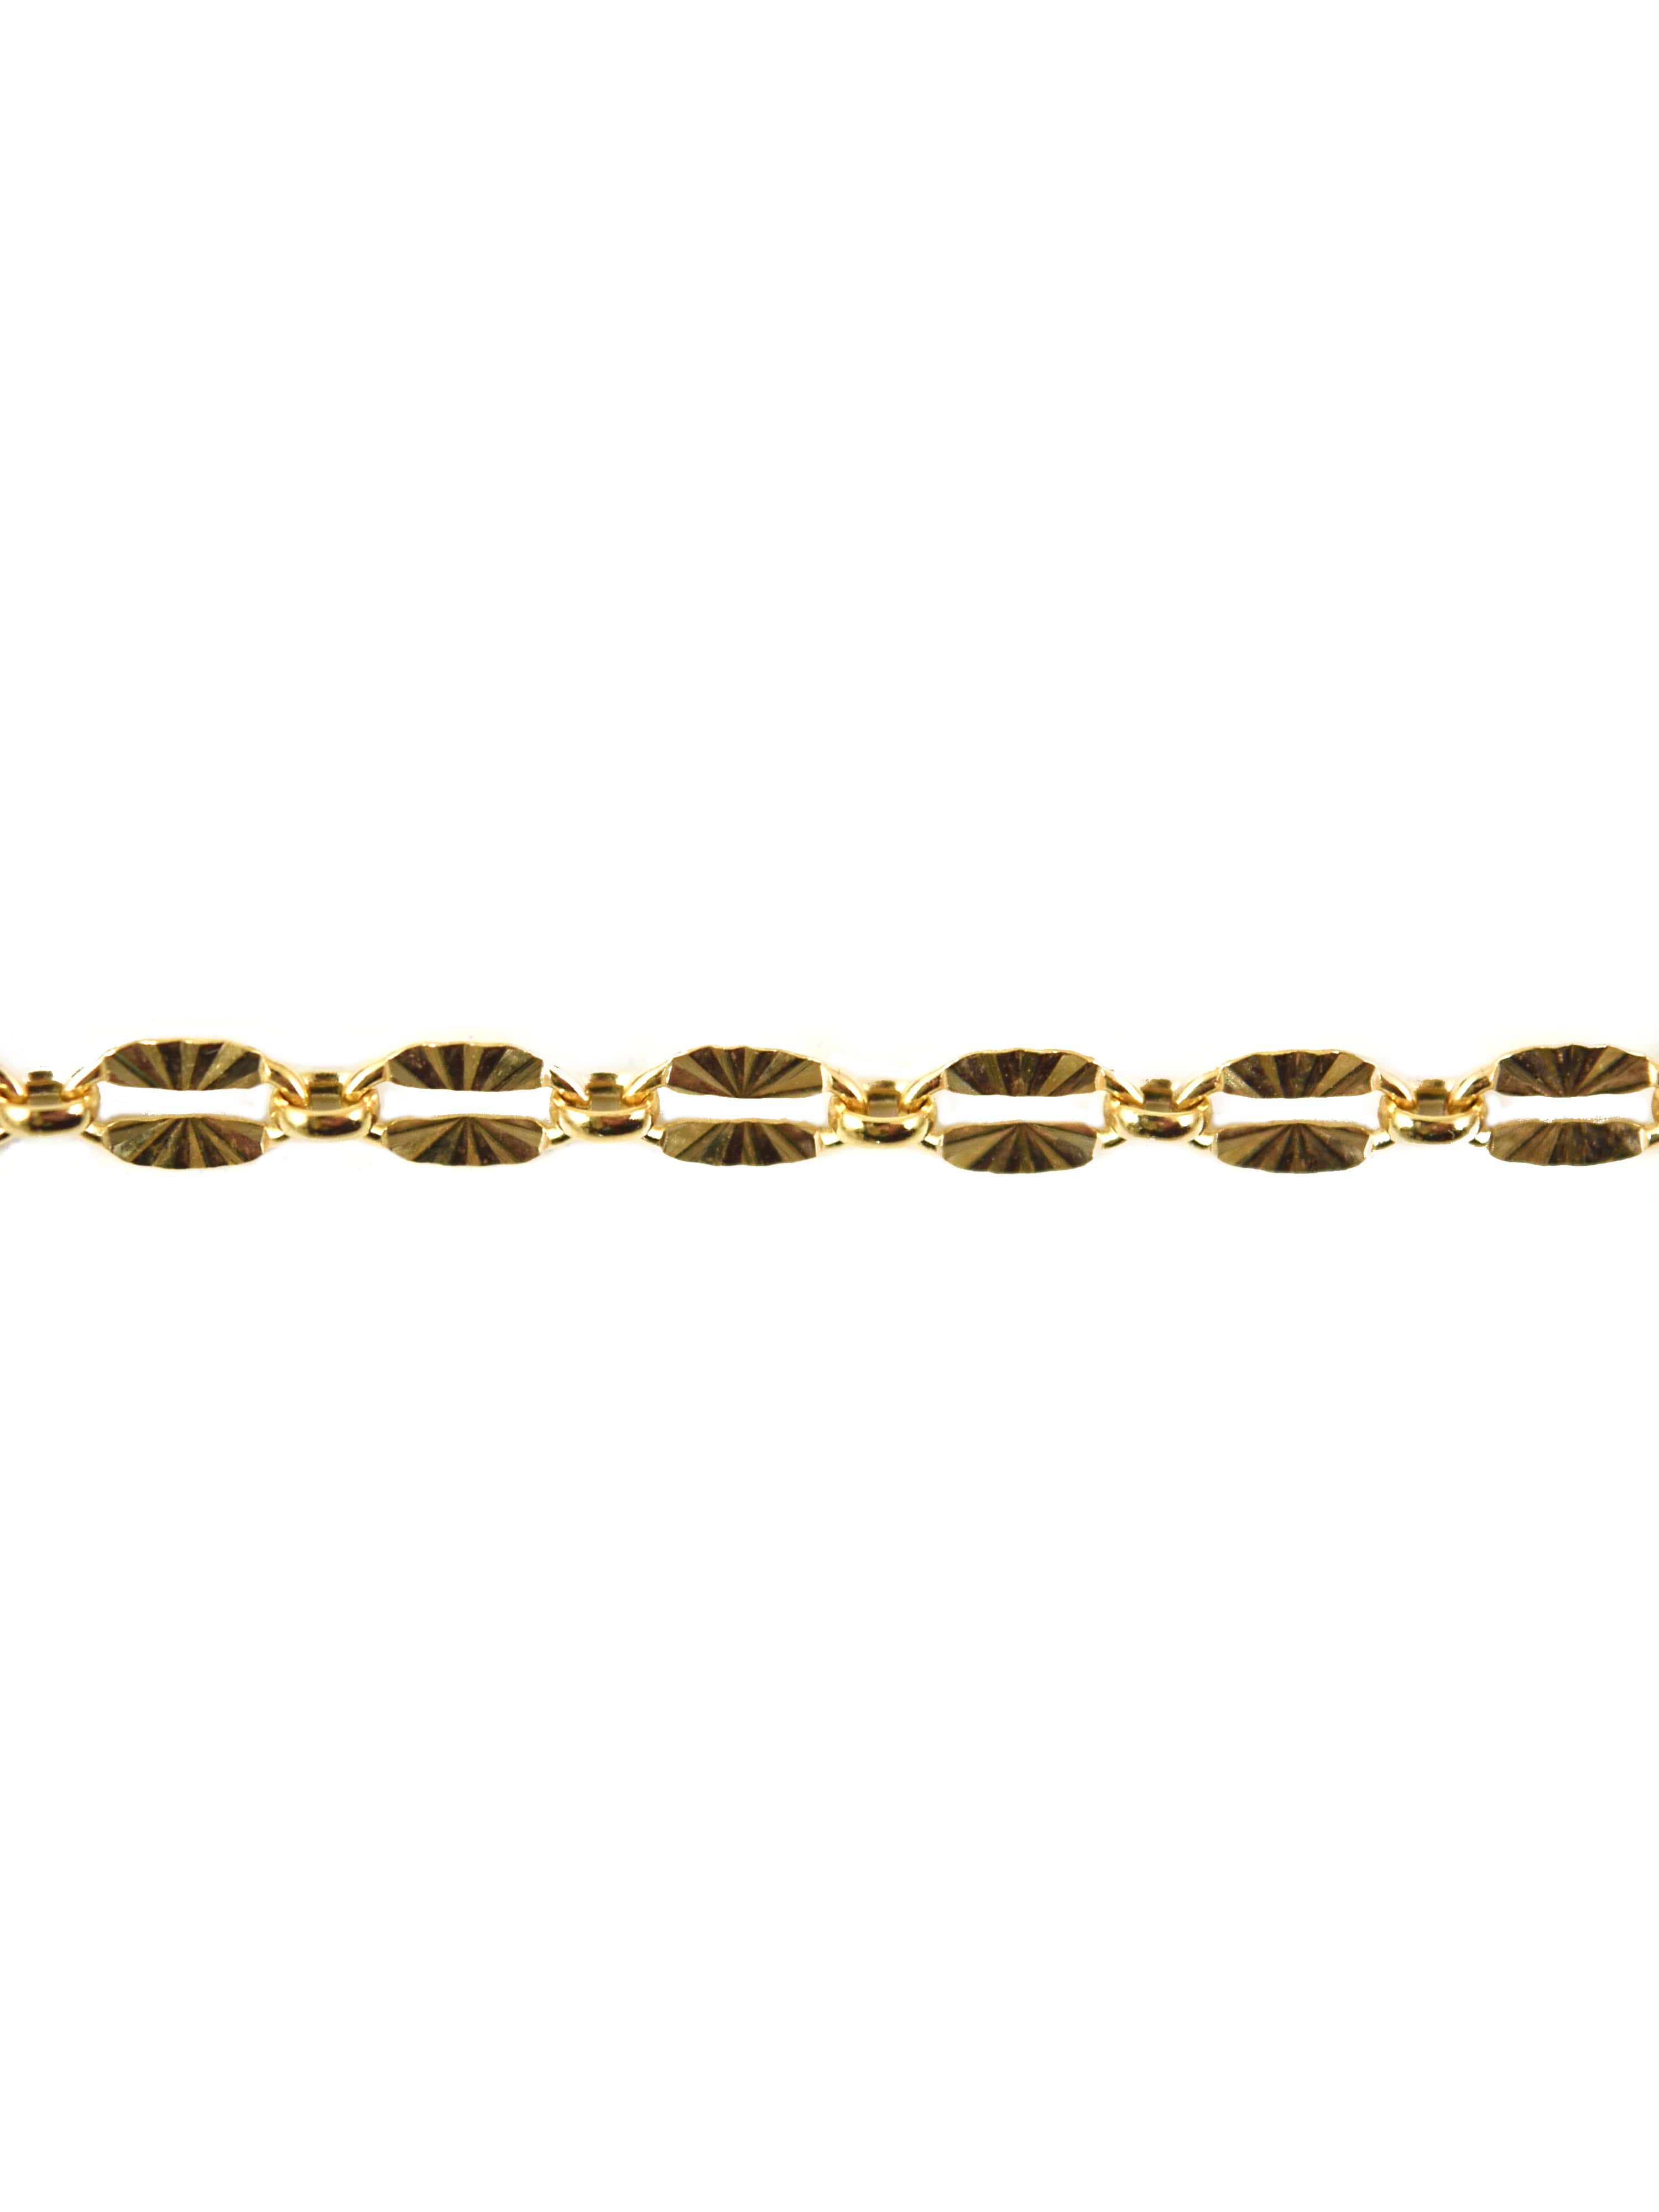 Sunny Chain in Gold Filled